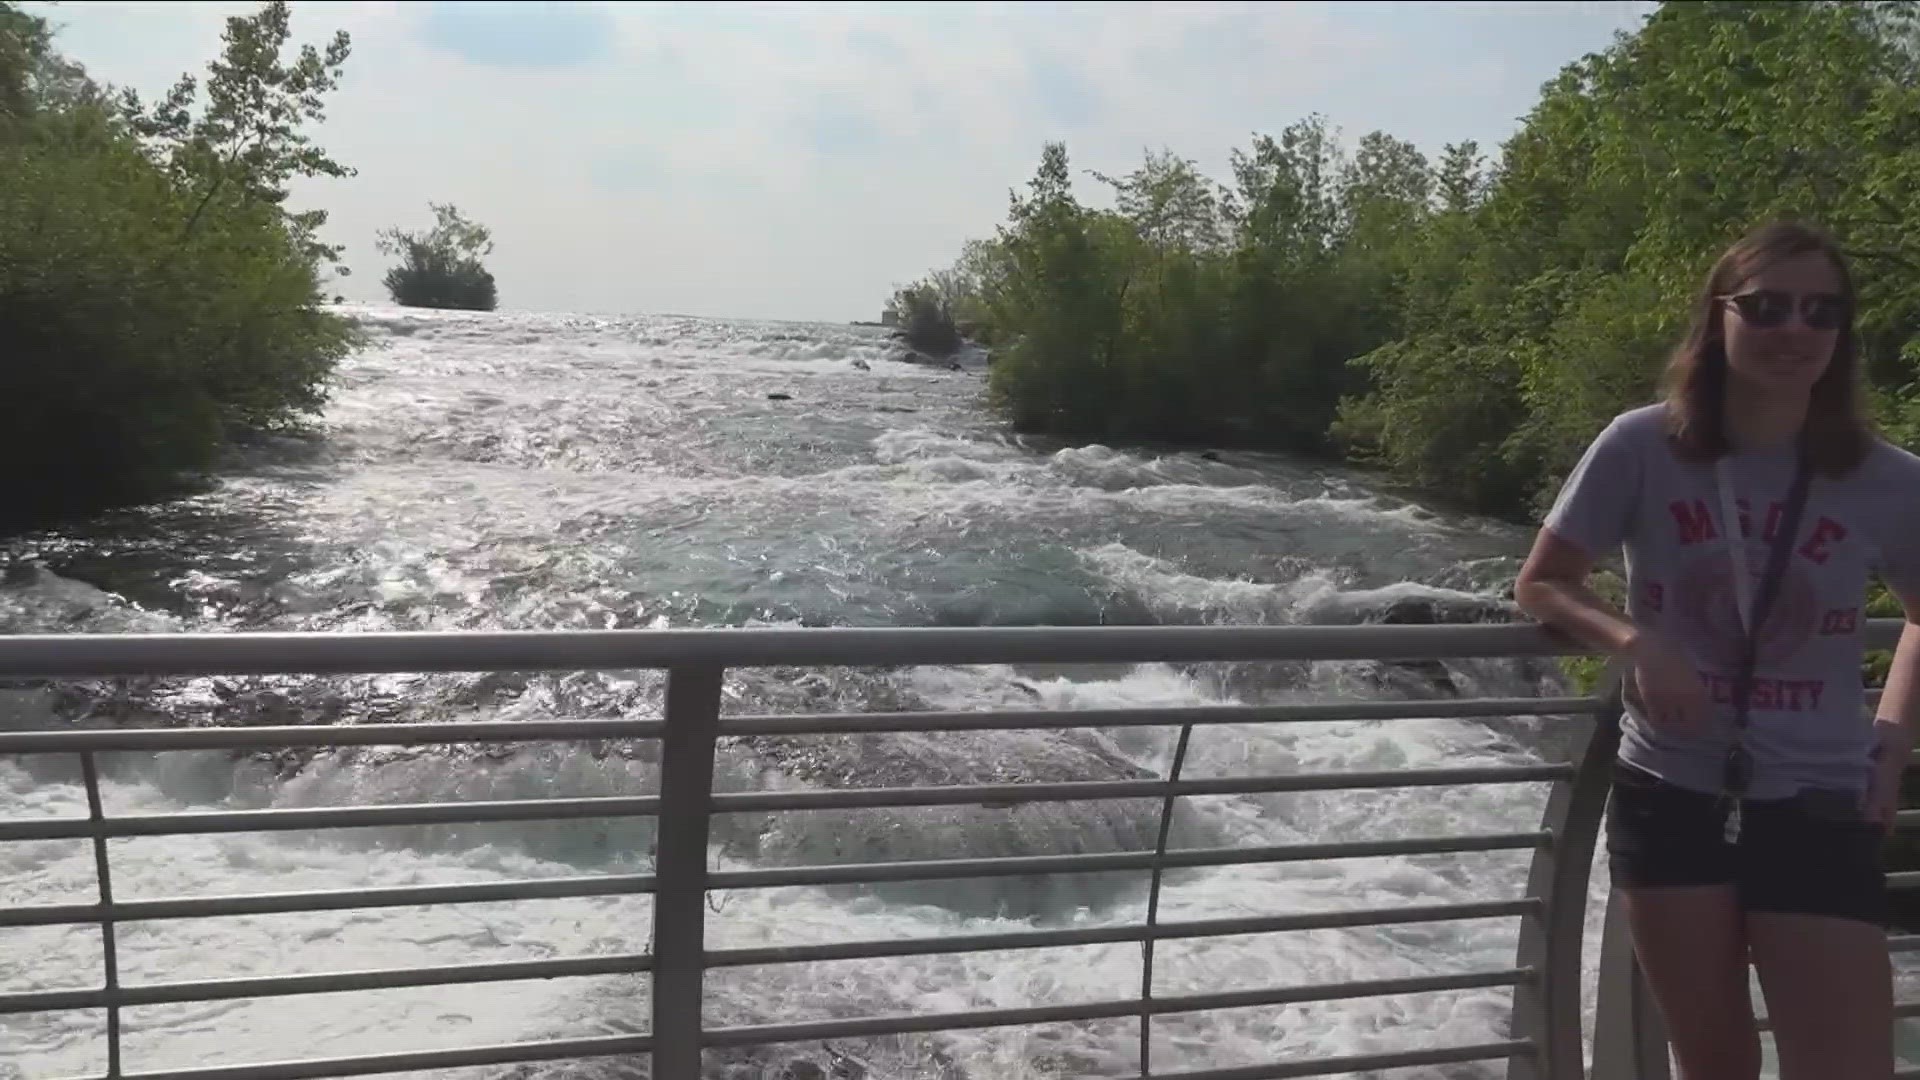 The islands allows you to get close to the rapids.